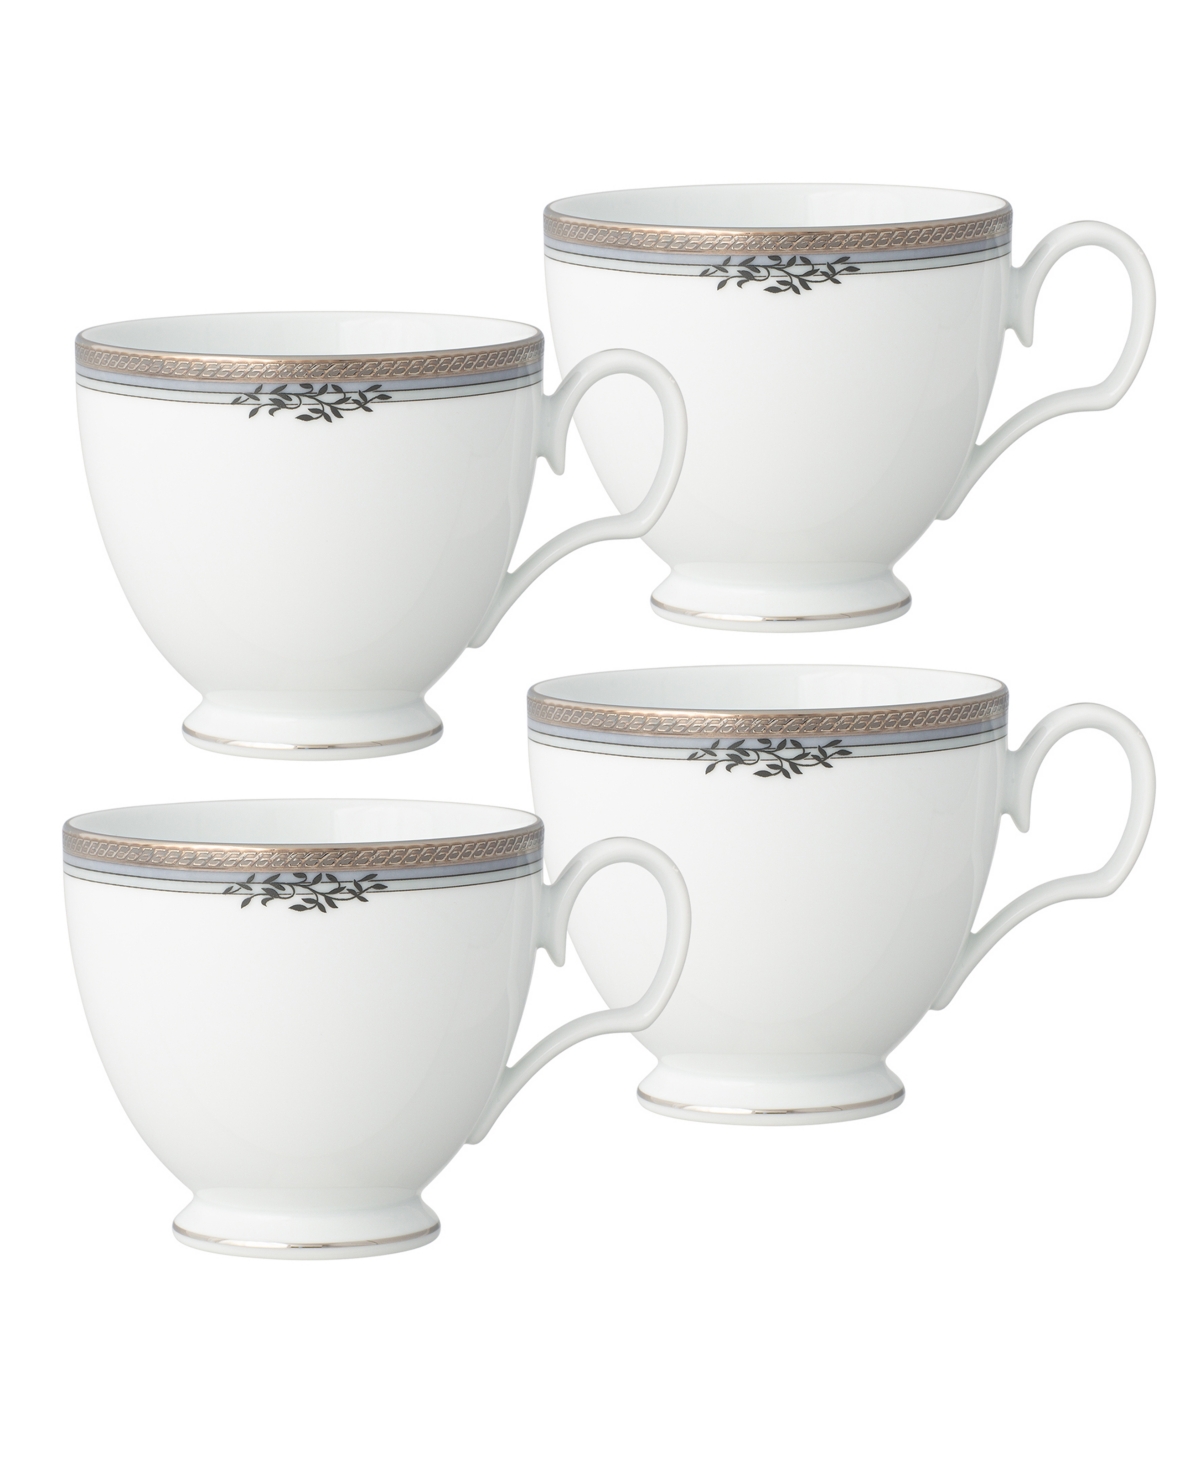 Noritake Laurelvale 4 Piece Cup Set, Service For 4 In White